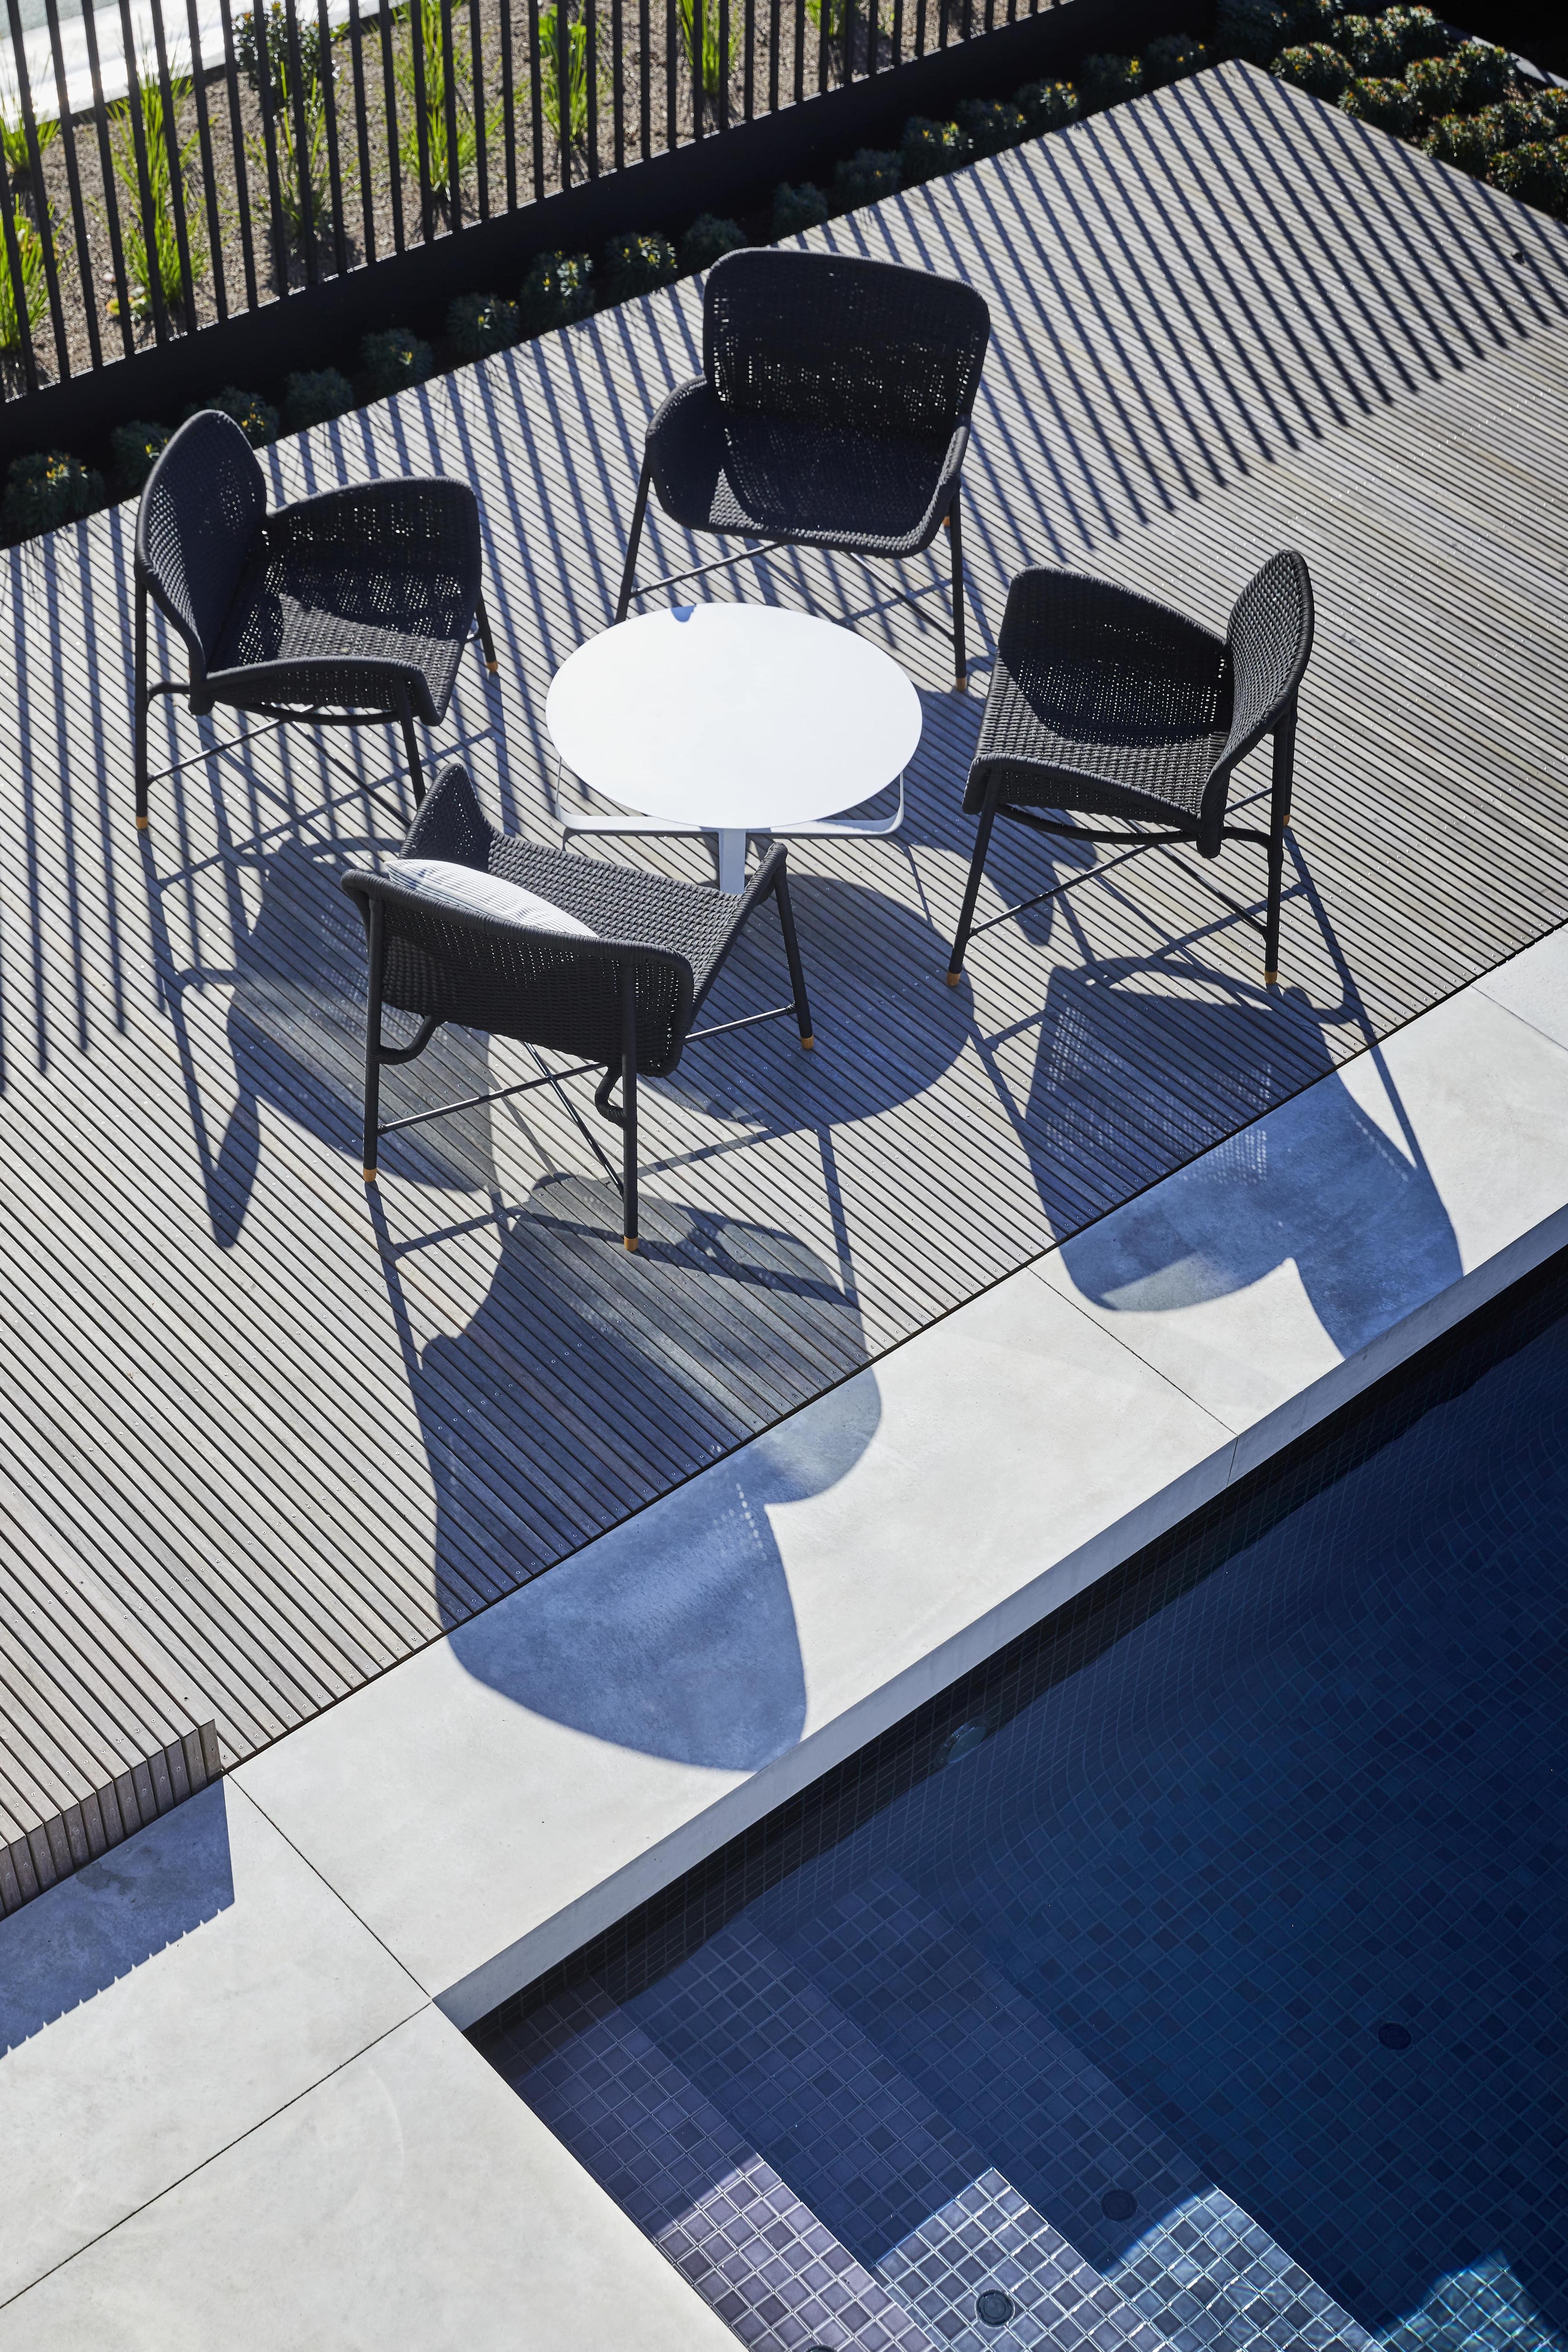 An outdoor table and chair on a deck beside a pool